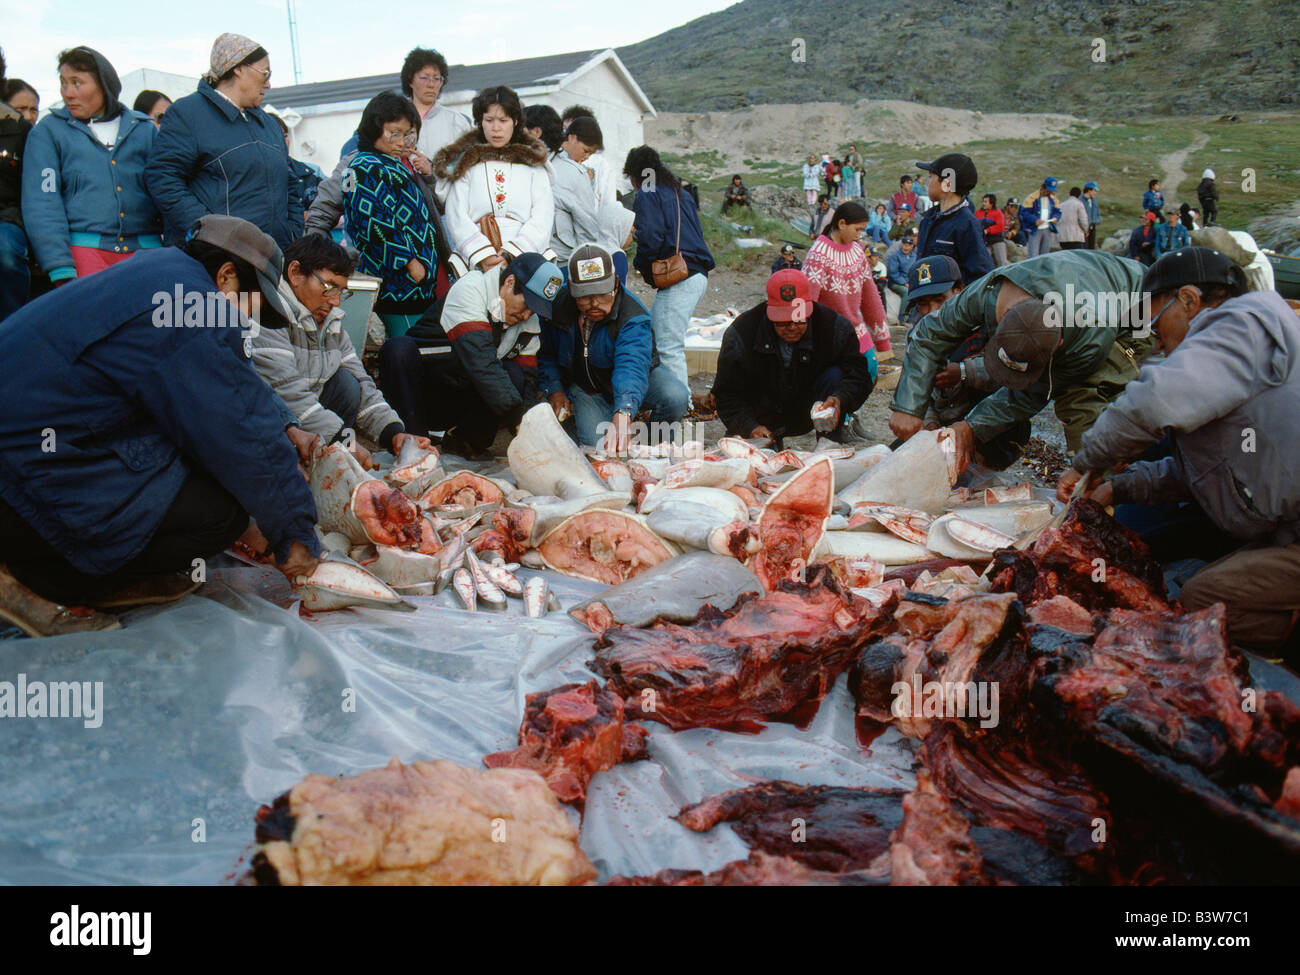 Inuit (Eskimo) people collect shares of Beluga whale meat in arctic village of Pangnirtung, Baffin Island, Nunavut, Canada Stock Photo